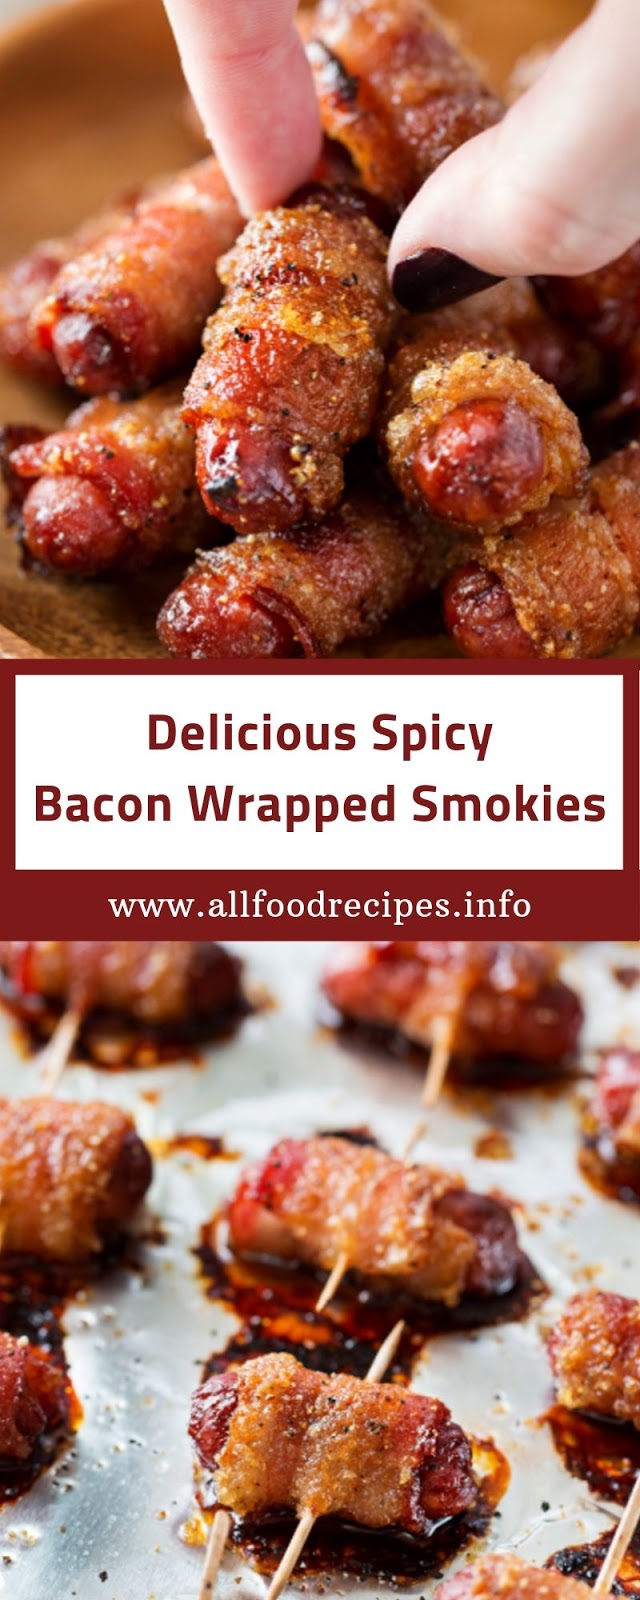 Delicious Spicy Bacon Wrapped Smokies